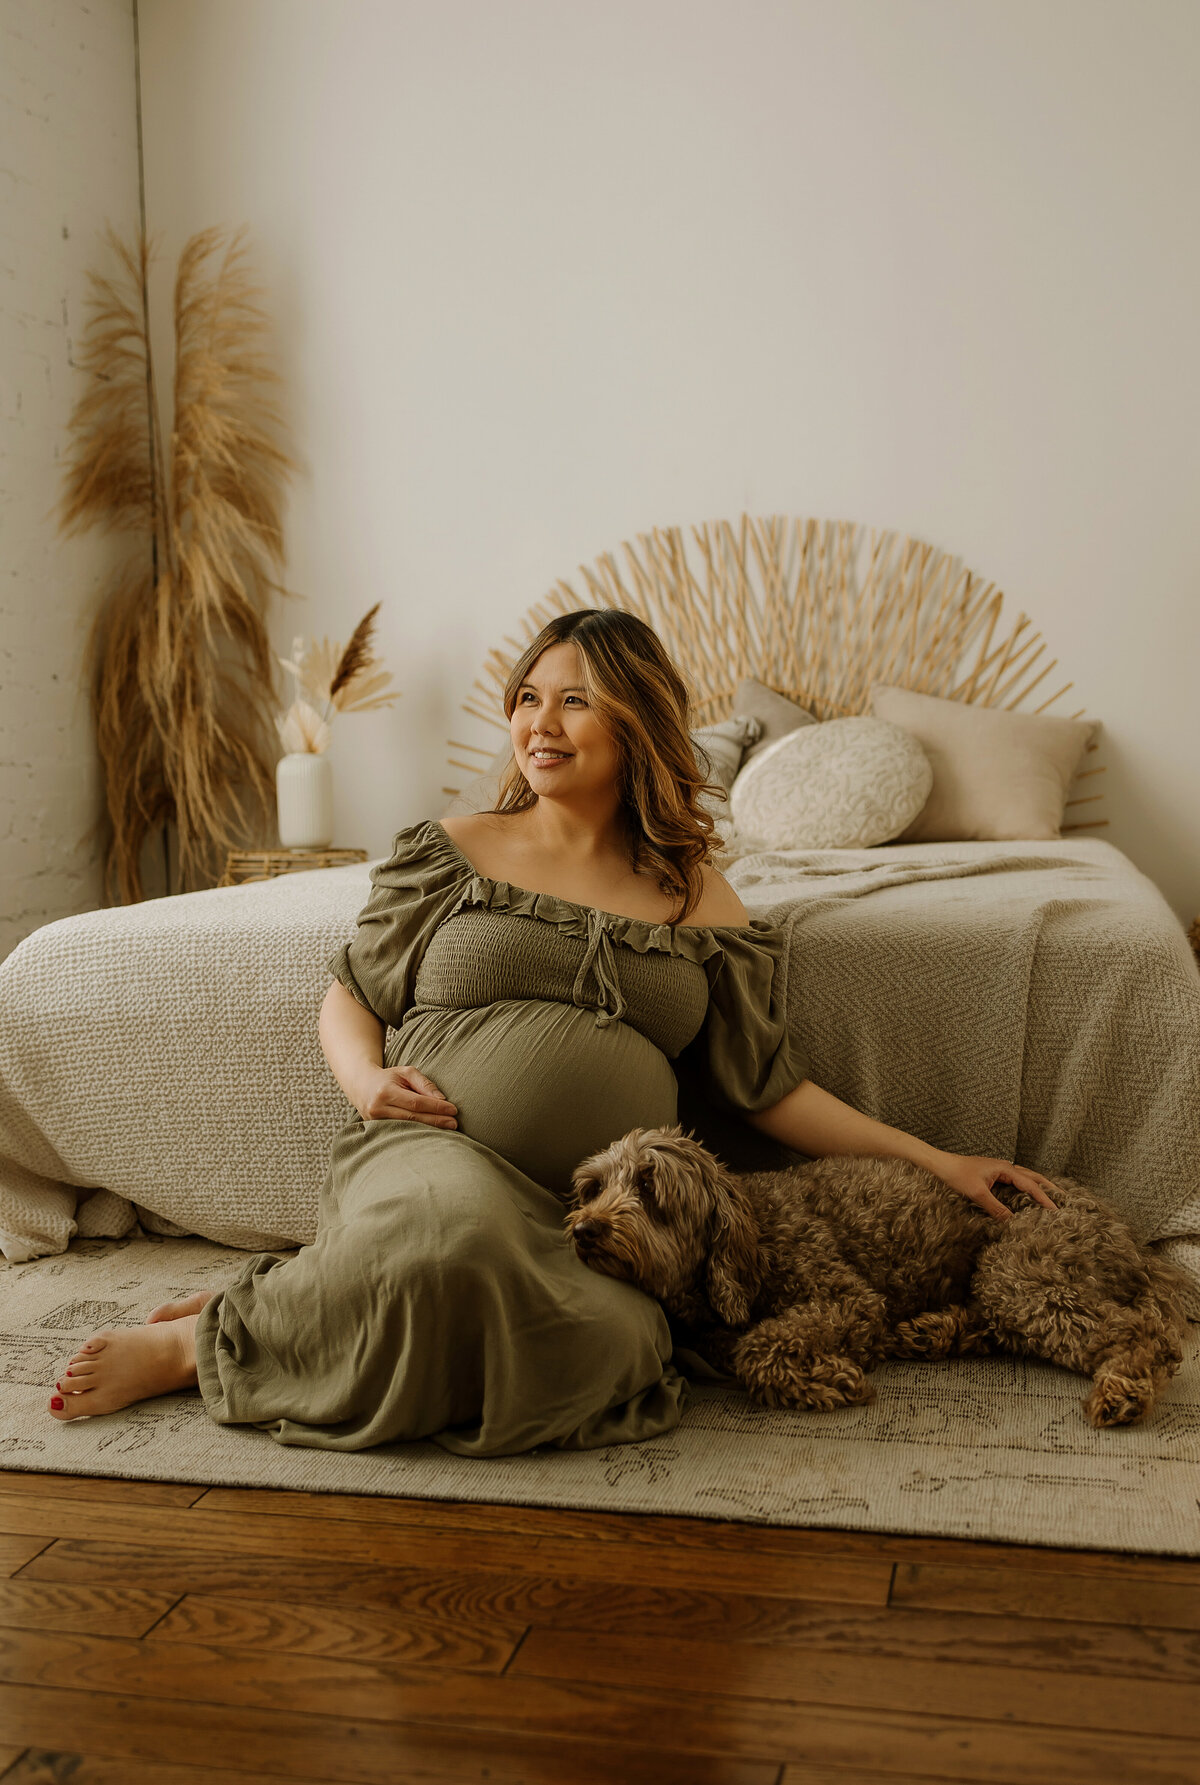 I'm Calgary's maternity photographer, ready to embrace your pregnancy journey. Let's create stunning images that tell the beautiful story of this special time.